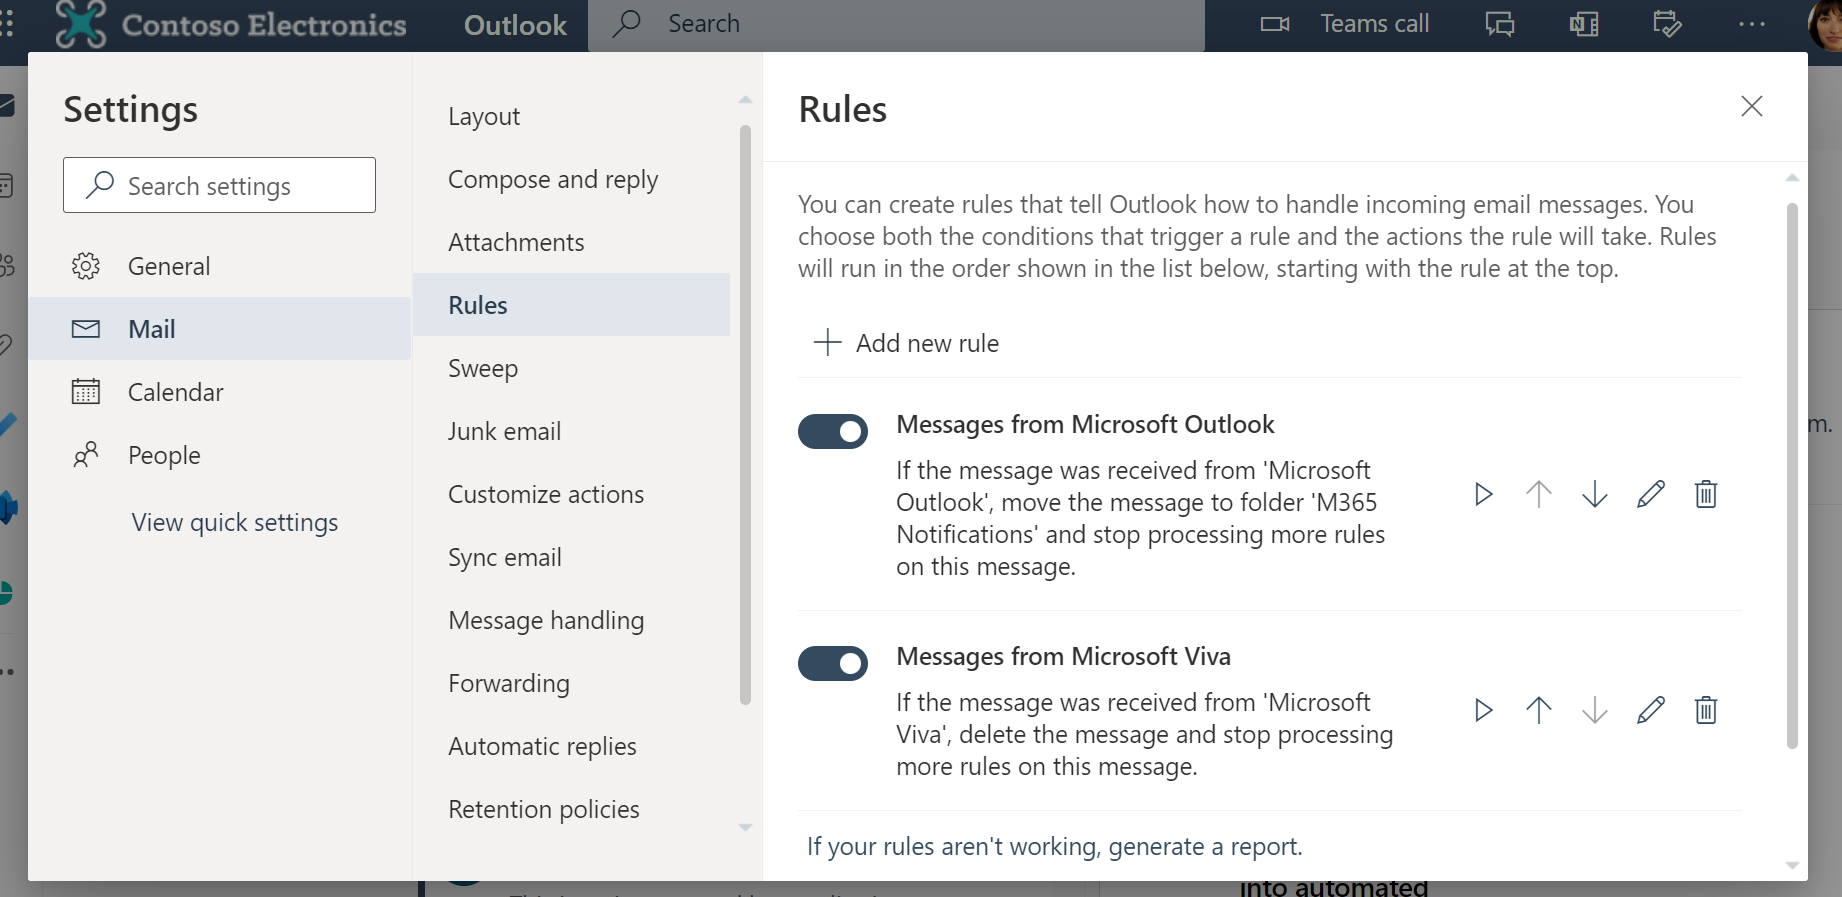 View and manage rules in Outlook settings